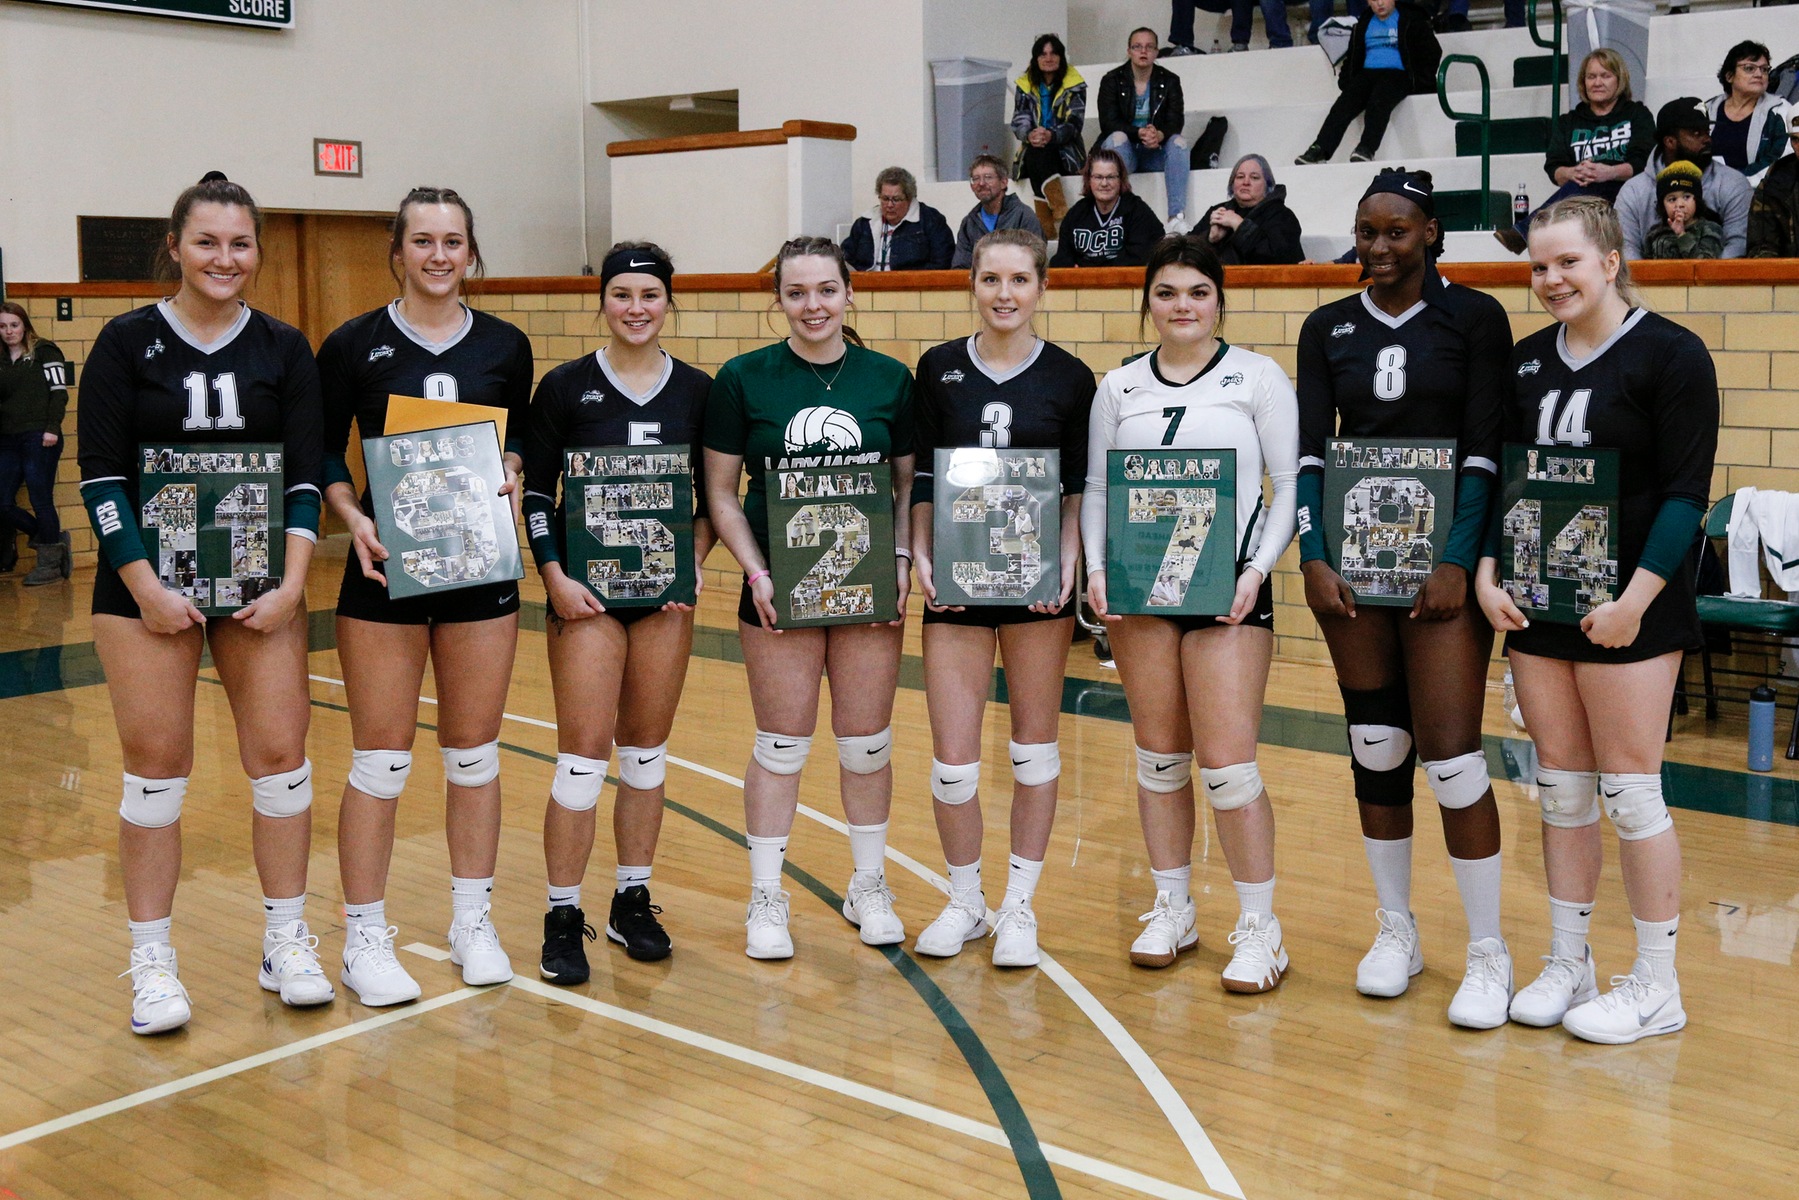 The 2019 DCB Volleyball sophomores were recognized on Monday at the Woodshed.  It was the final match for these 8 sophomores in a DCB uniform.